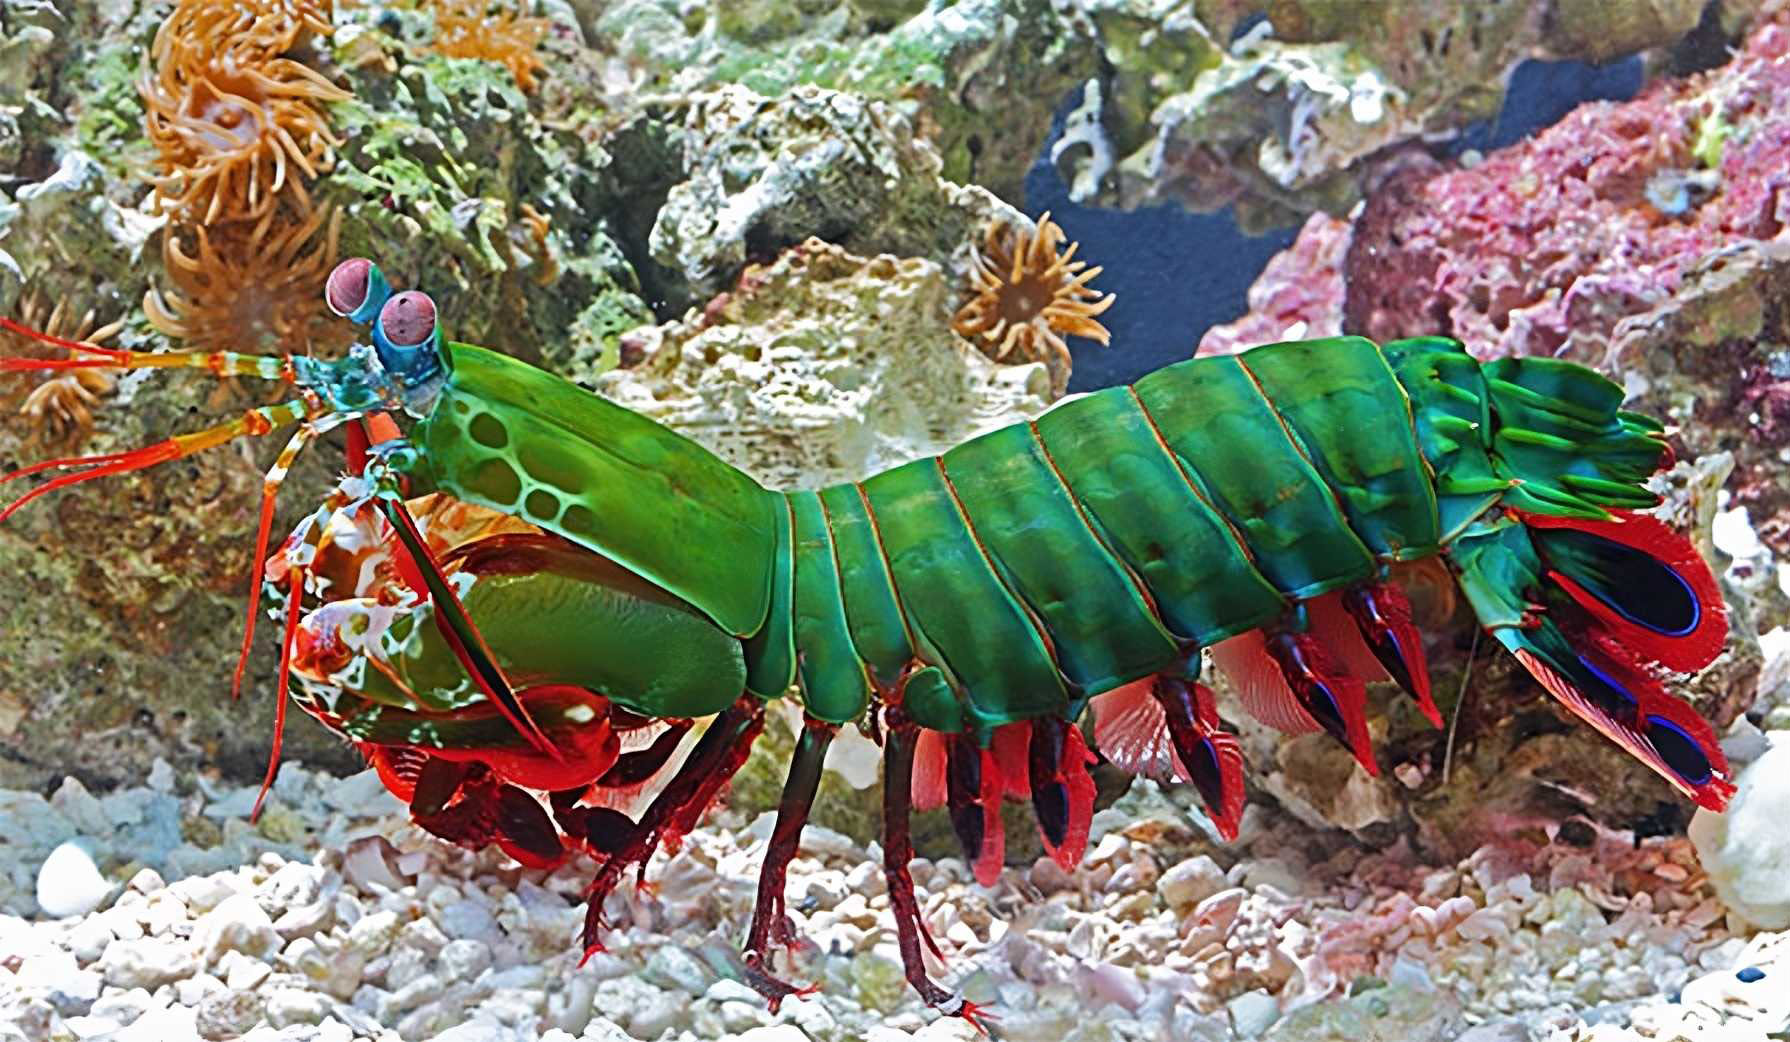 Peacock mantis shrimp found in the warm waters of the Indian and Pacific Oceans.